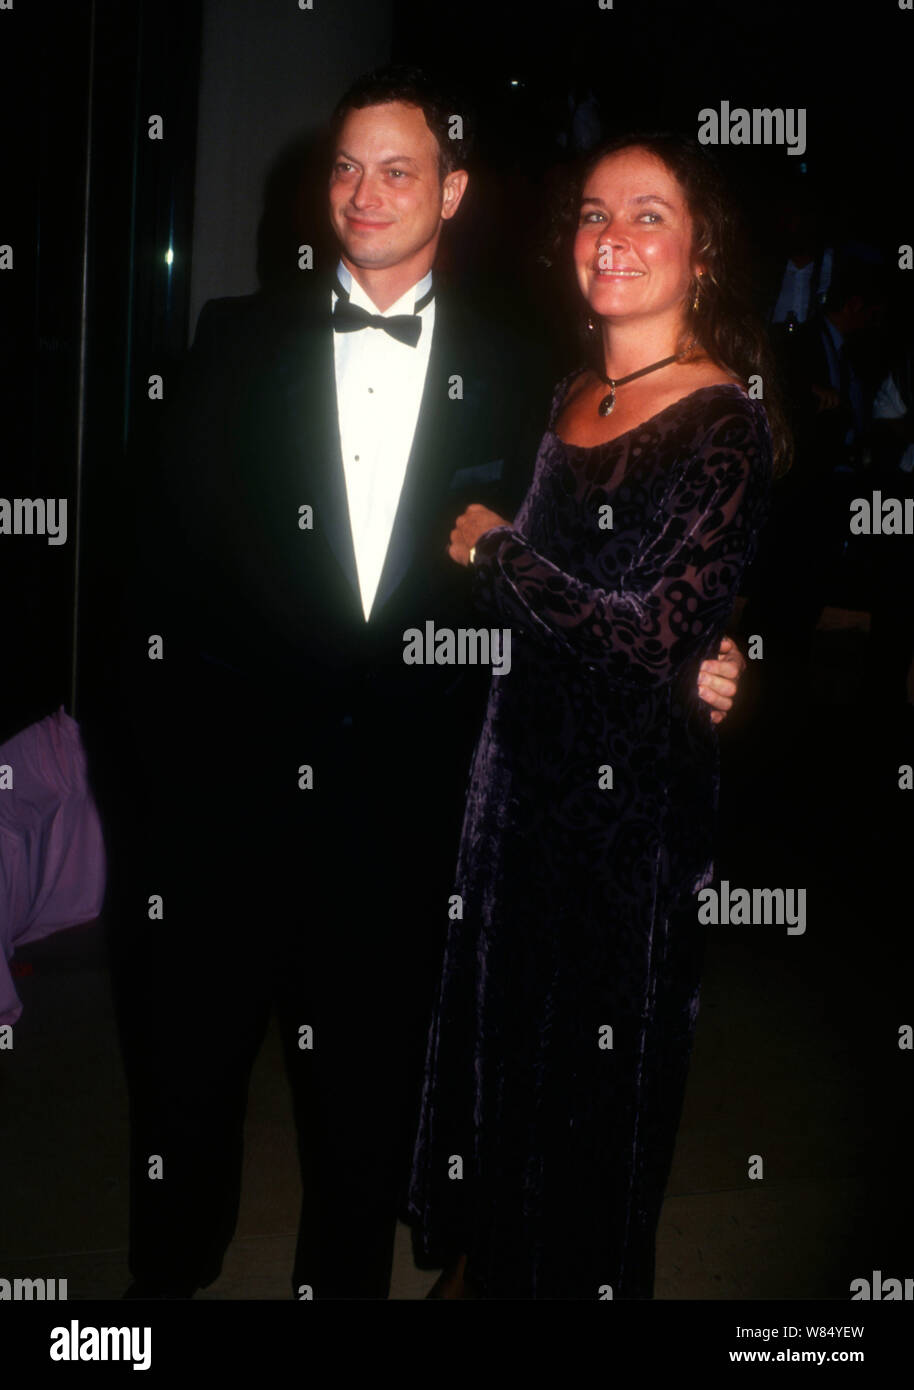 Beverly Hills, California, USA 28th October 1994 Actor Gary Sinise and Moira Harris attend the 1994 Carousel of Hope Ball to Benefit the Barbara Davis Center for Childhood Diabetes on October 28, 1994 at the Beverly Hilton Hotel in Beverly Hills, California, USA. Photo by Barry King/Alamy Stock Photo Stock Photo